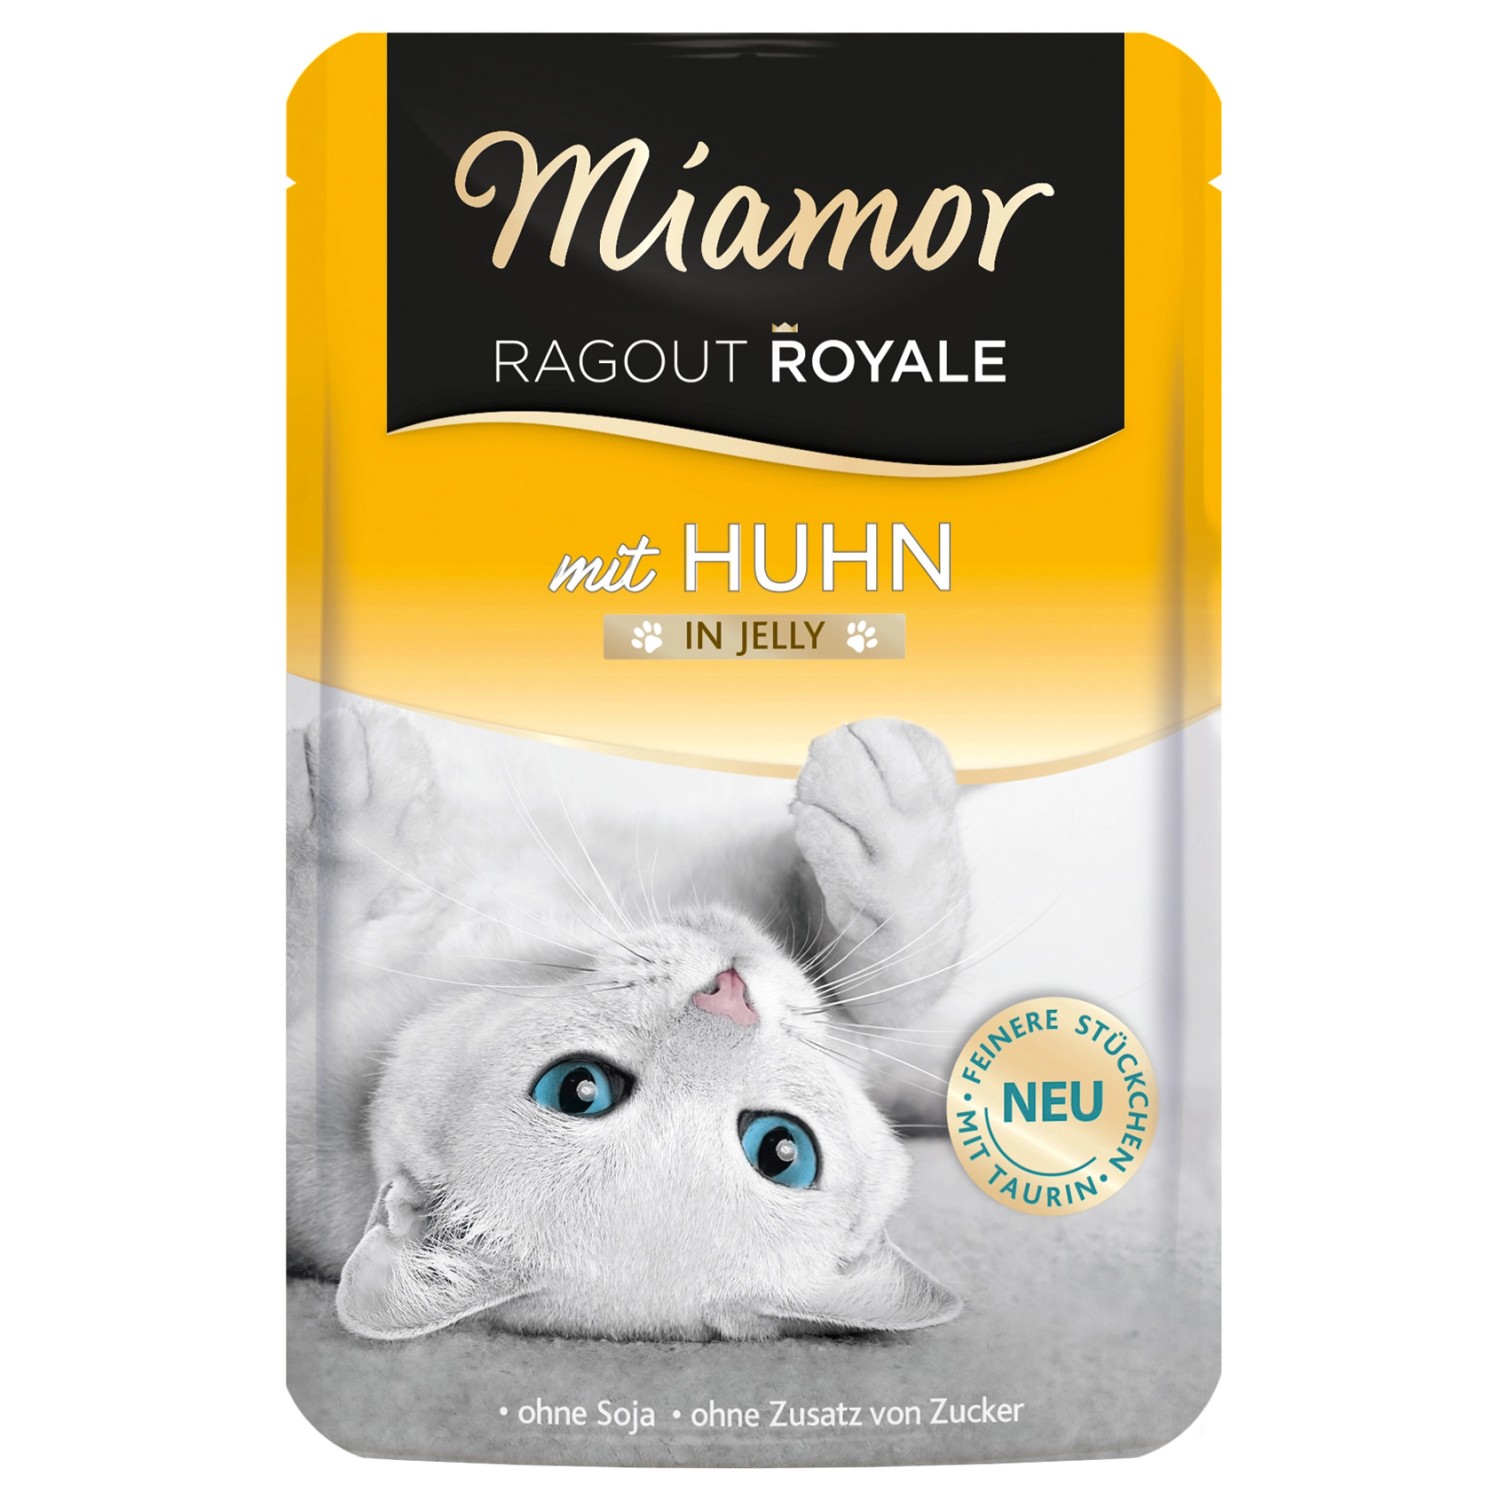 Miamor Ragout Royal Huhn in Jelly 100 g